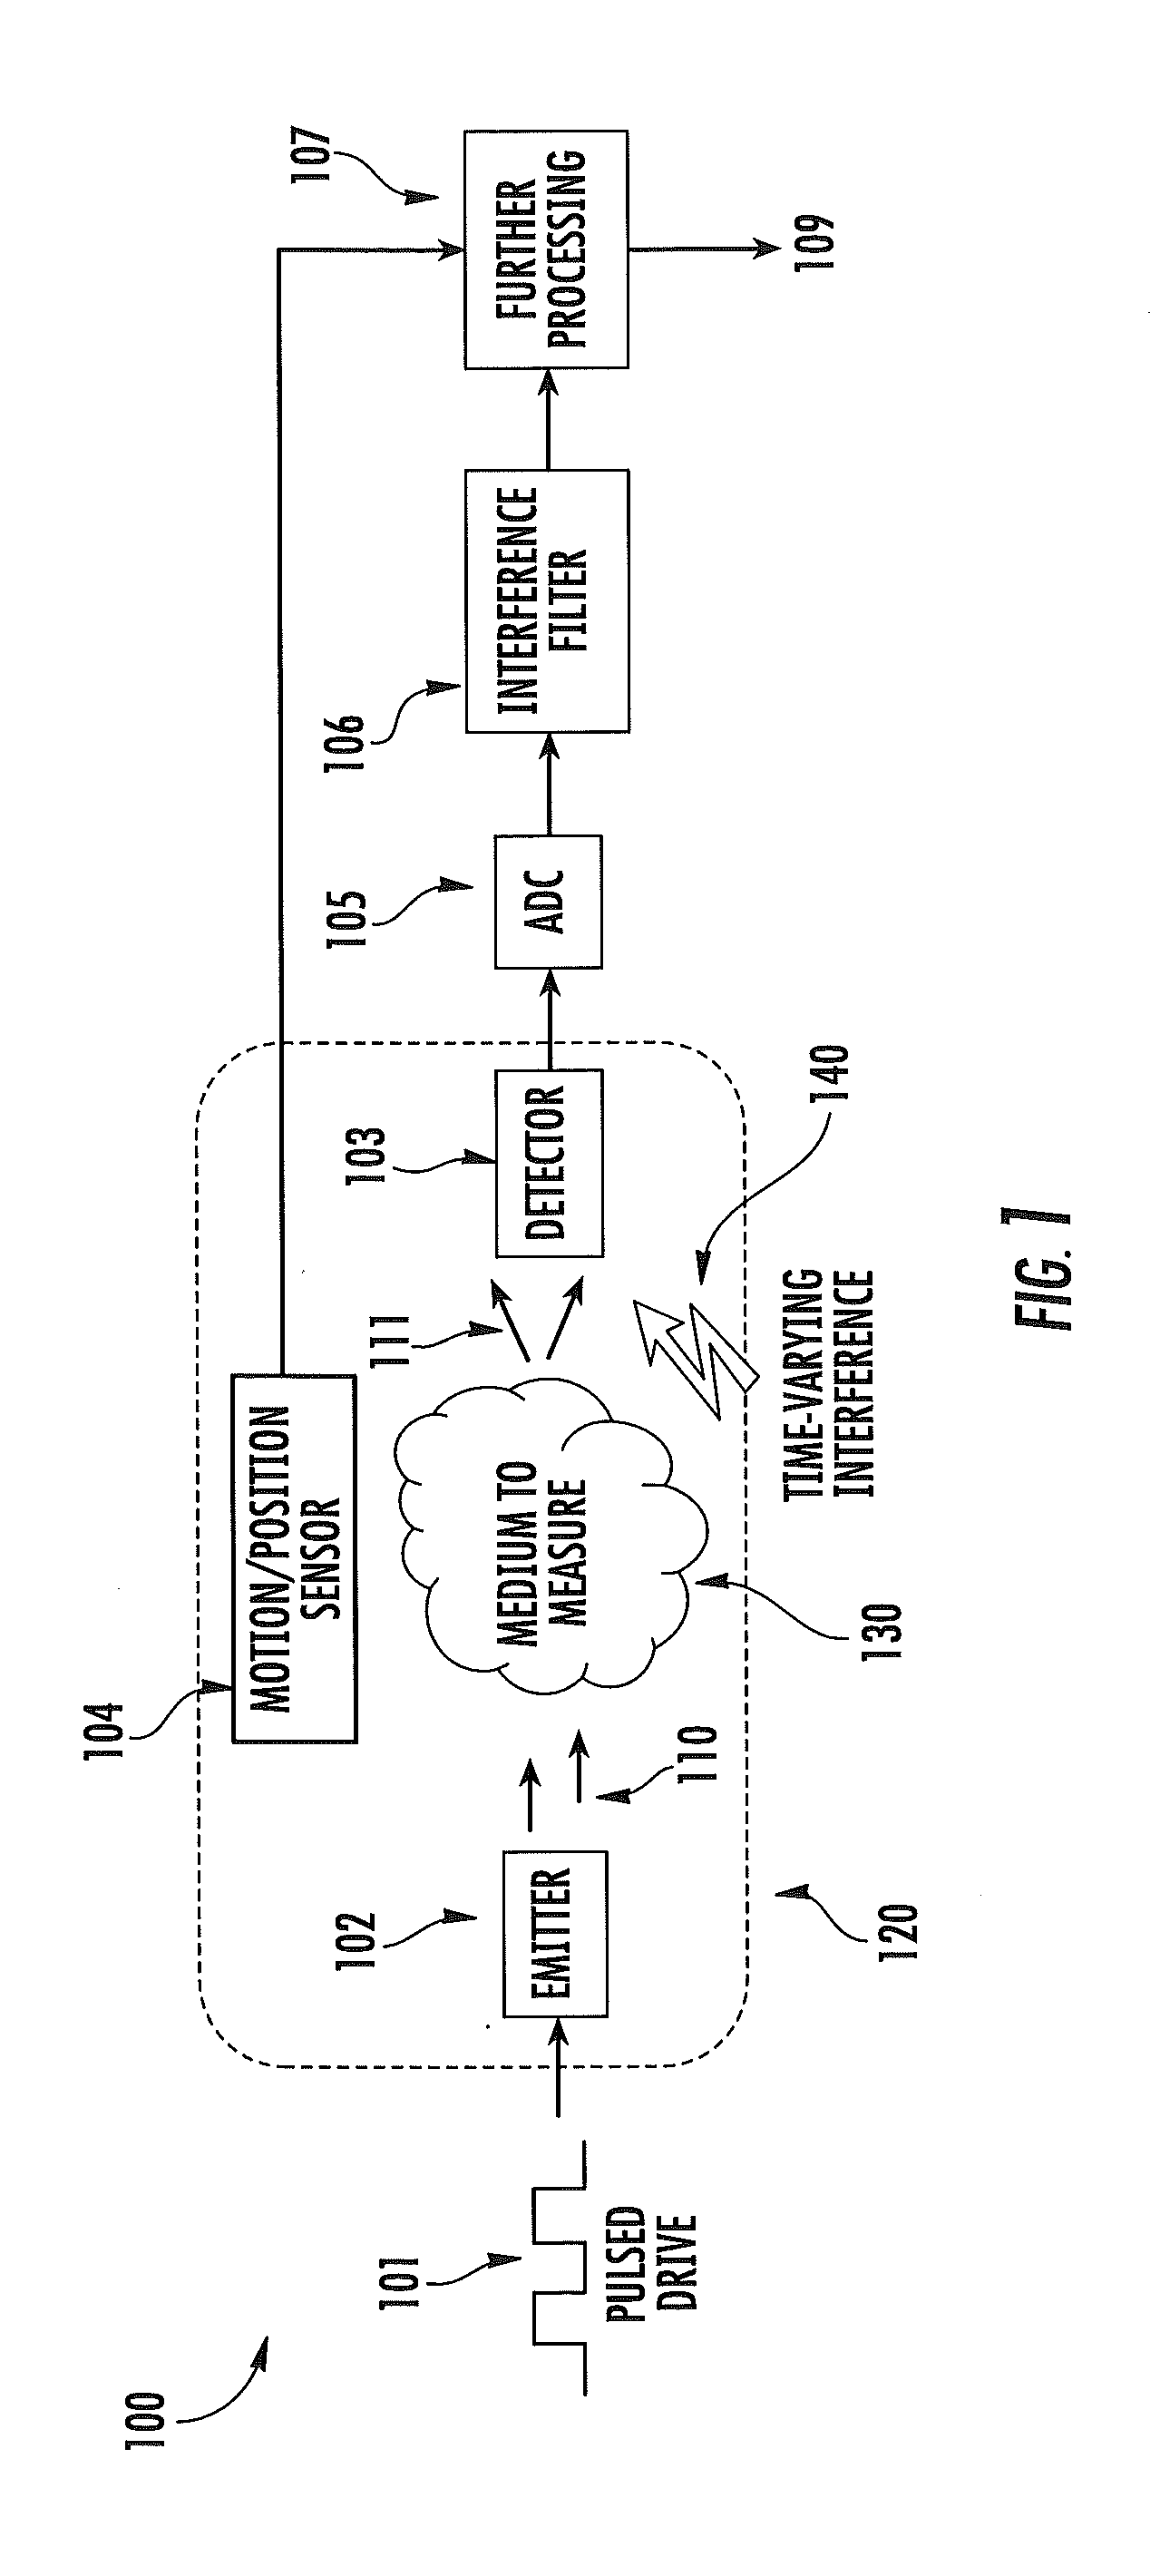 Apparatus and methods for monitoring physiological data during environmental interference